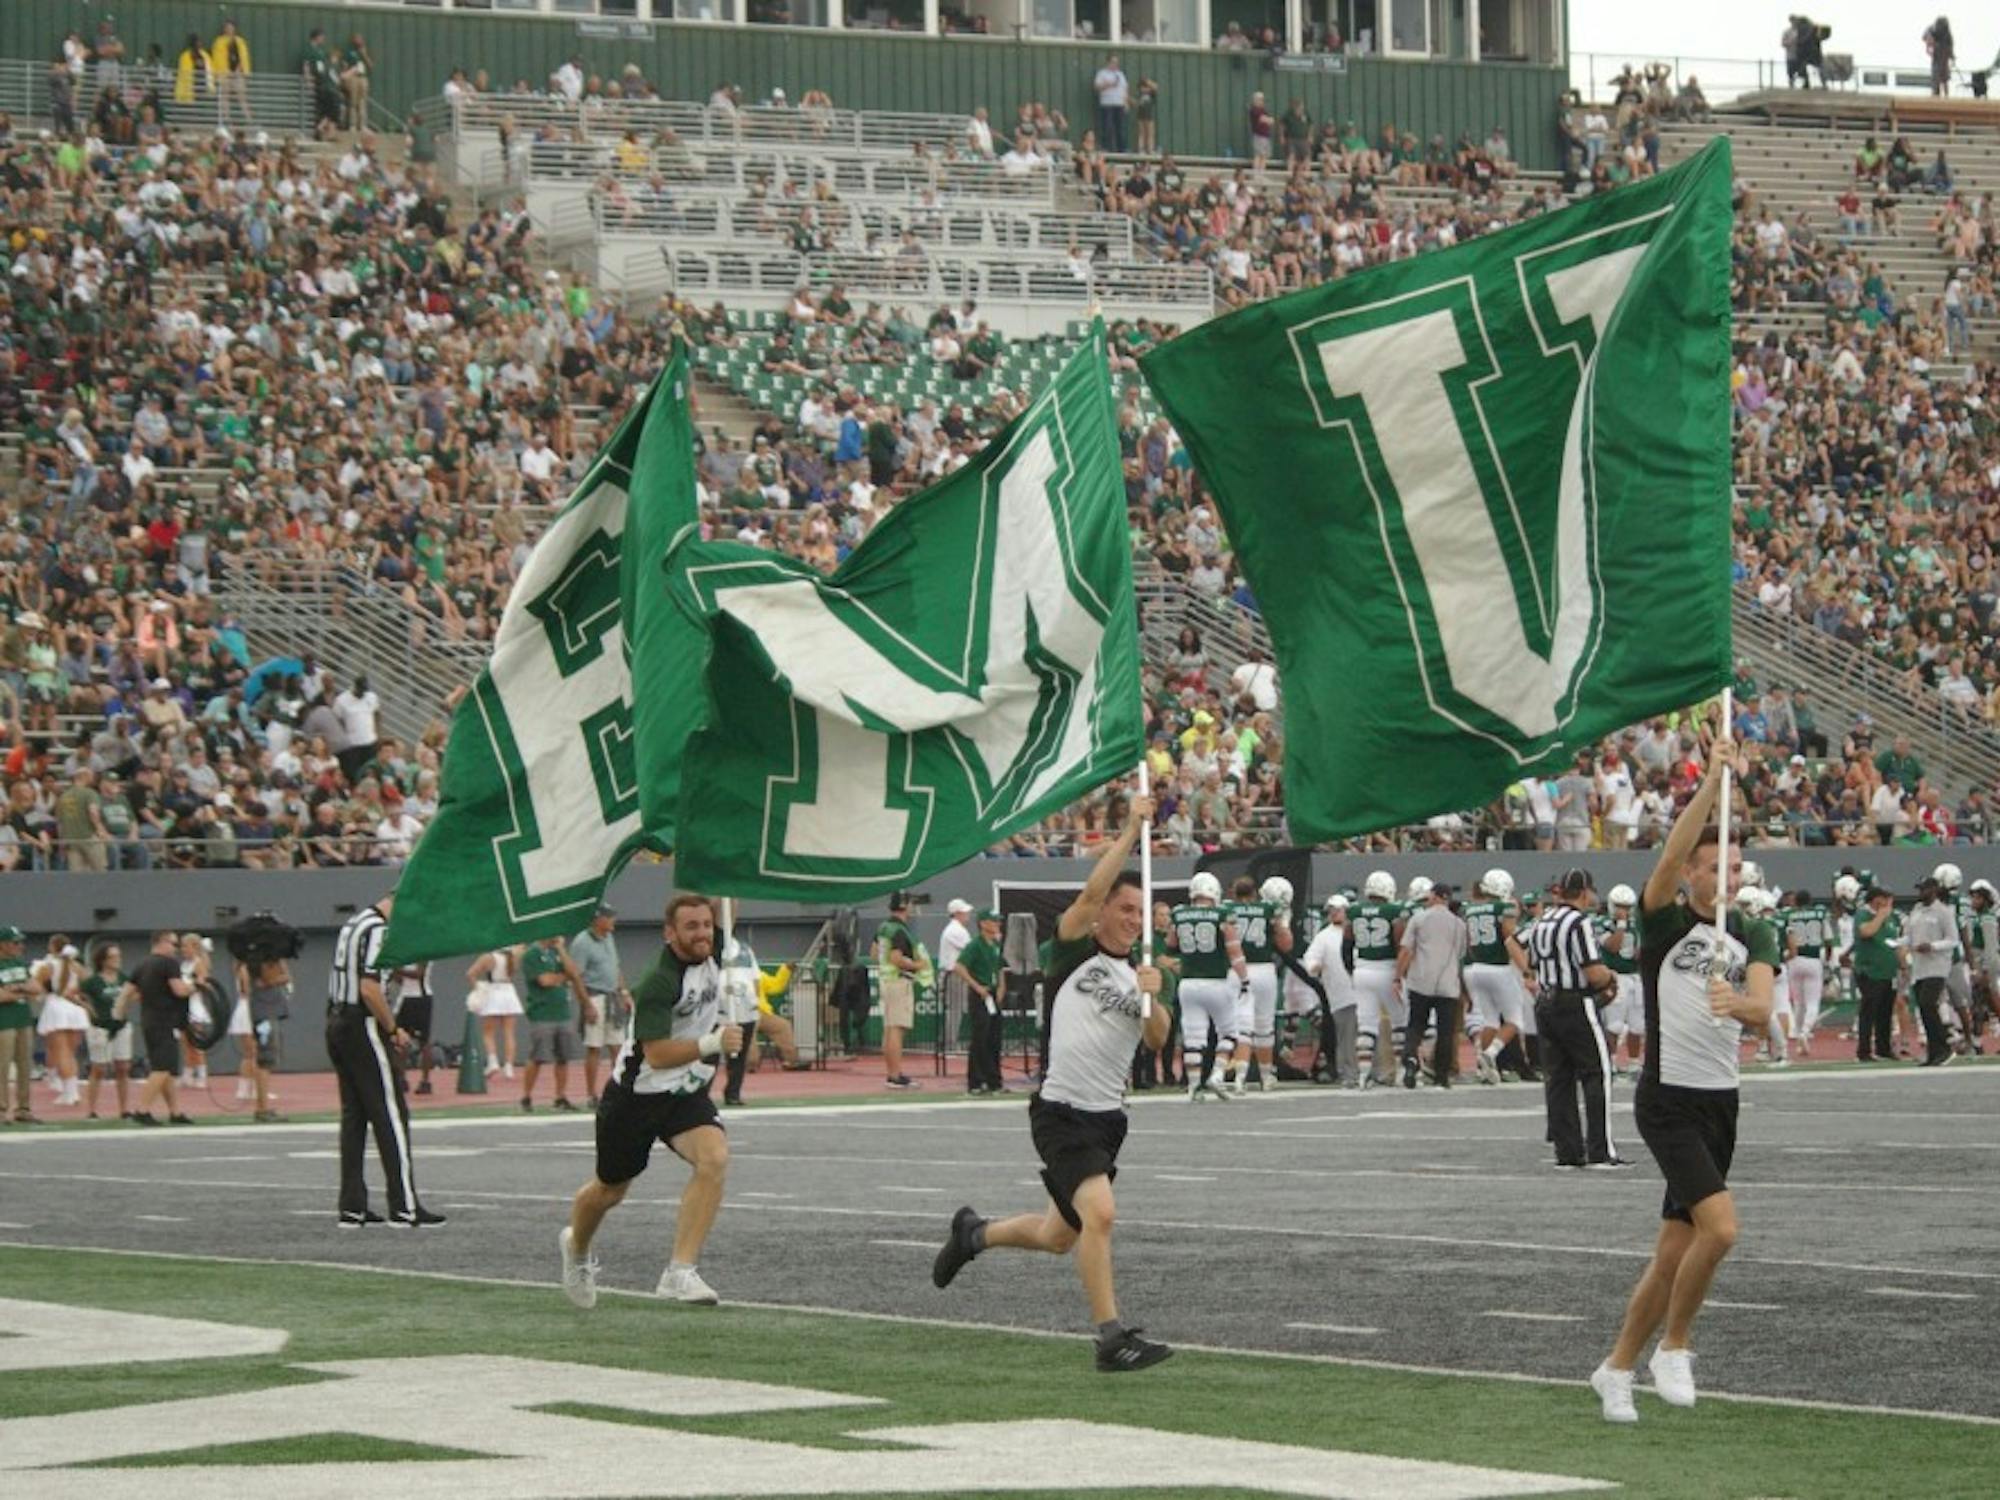 EMU flags fly in endzone